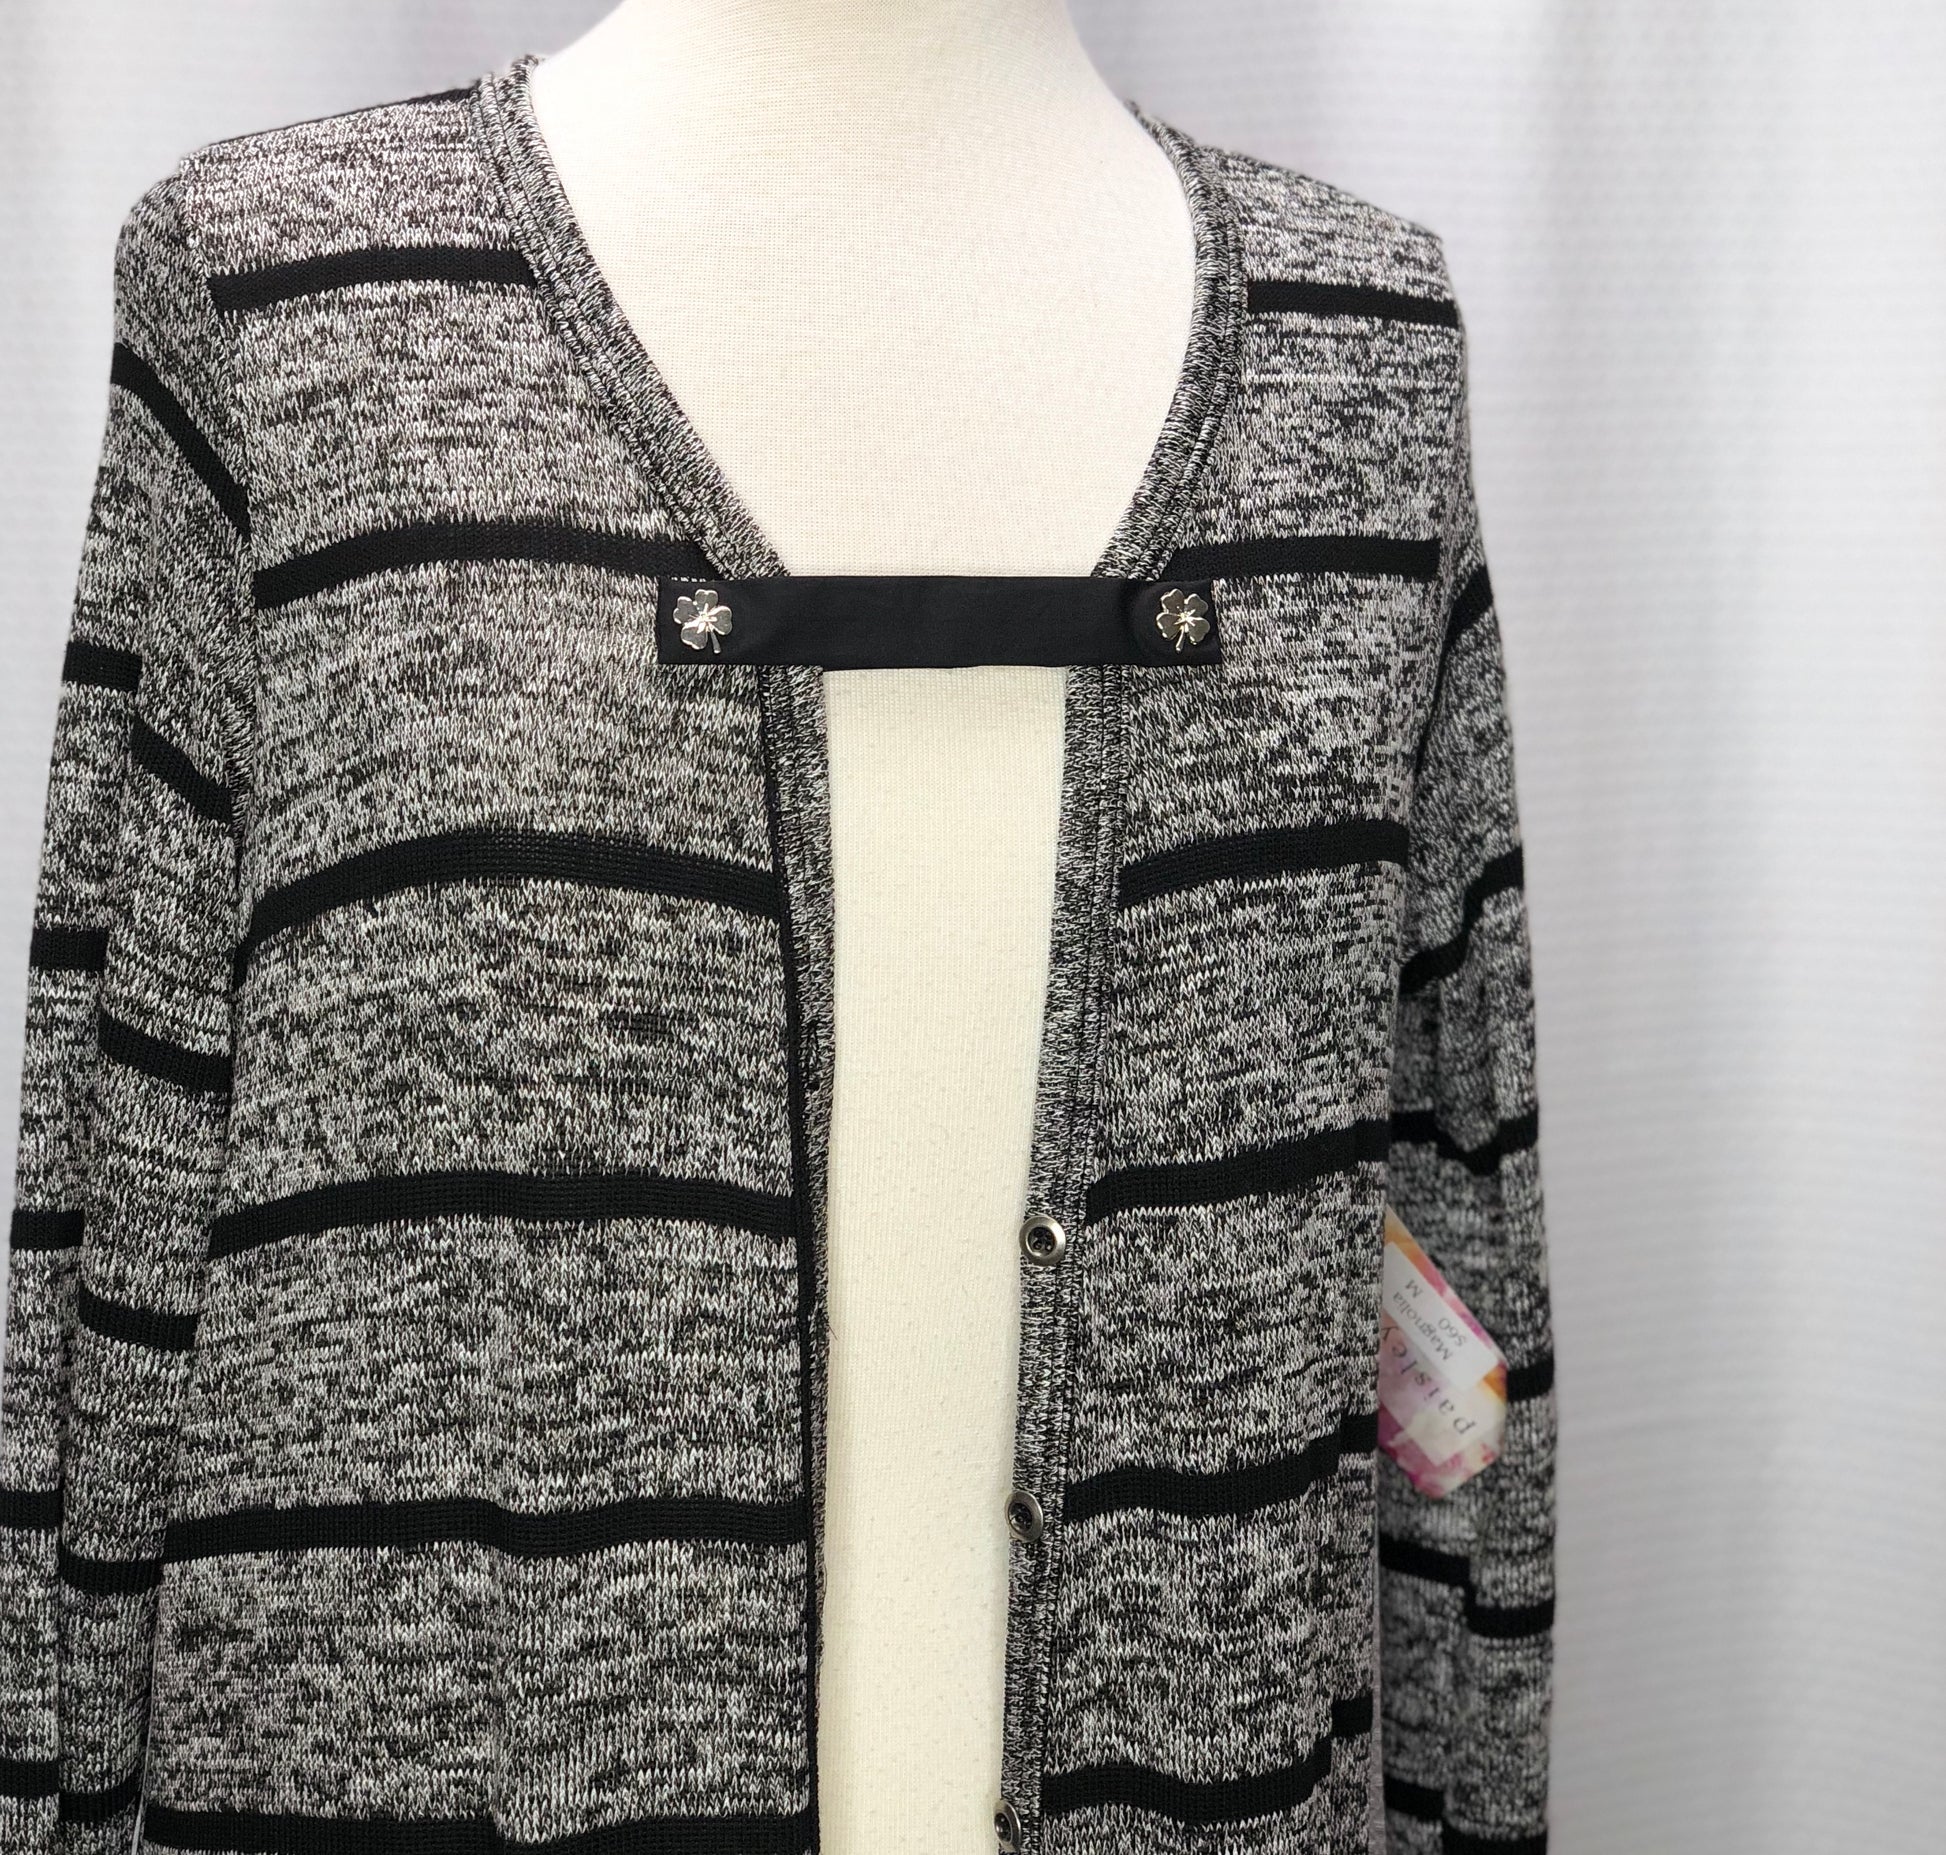 A ladies long gray knitted cardigan sweater with horizontal black stripes, on a fabric mannequin, against a white background.  A black FitClip with 4-leaf clovers on each end are holding the sweater together at the lower portion of the neckline, as a demo example of how to style a FitClip.